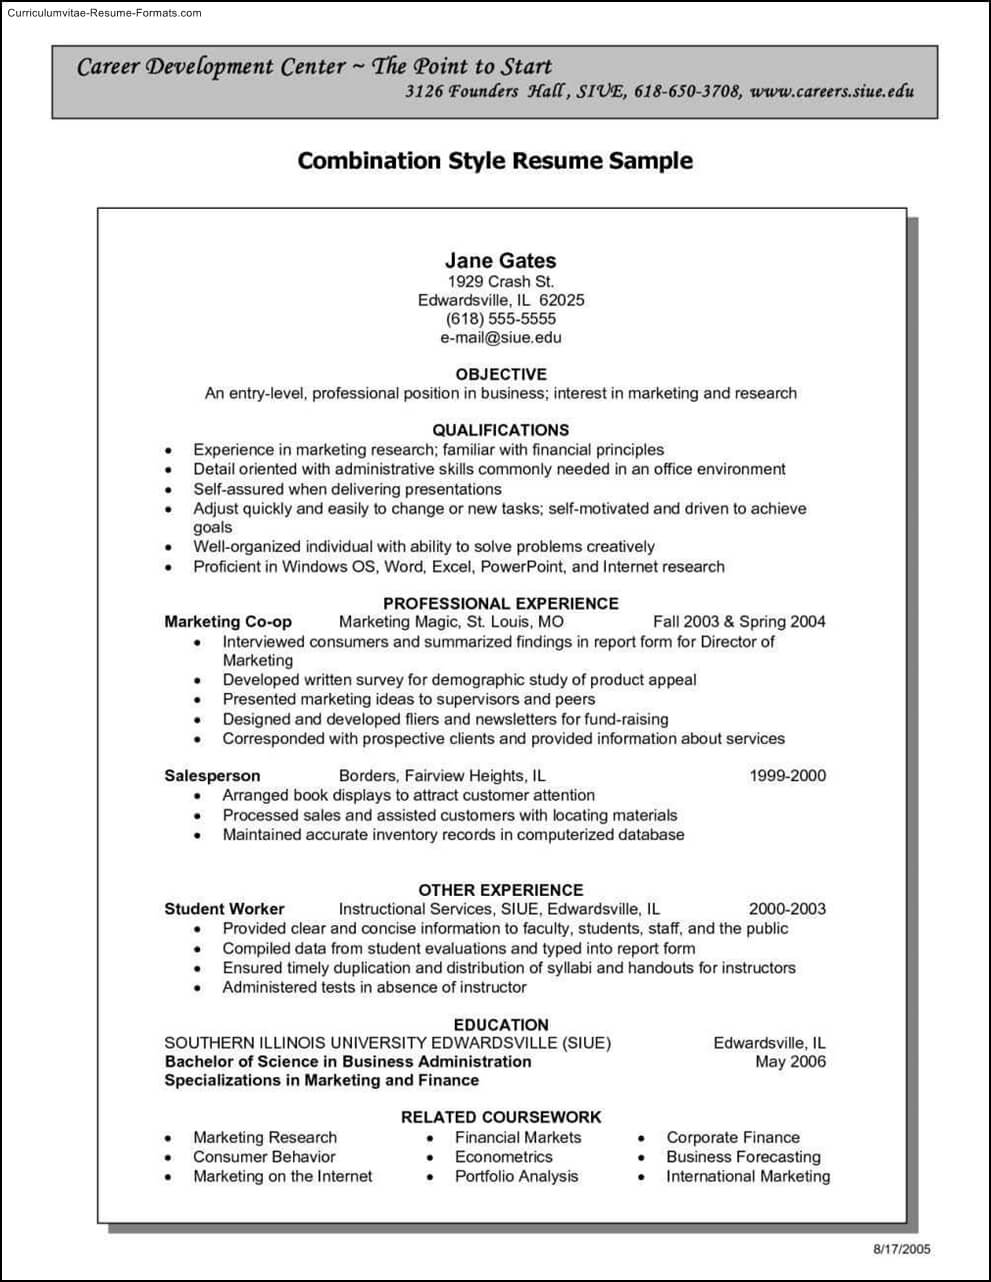 Making A Resume With Word | Resume Creator Online Within Combination Resume Template Word